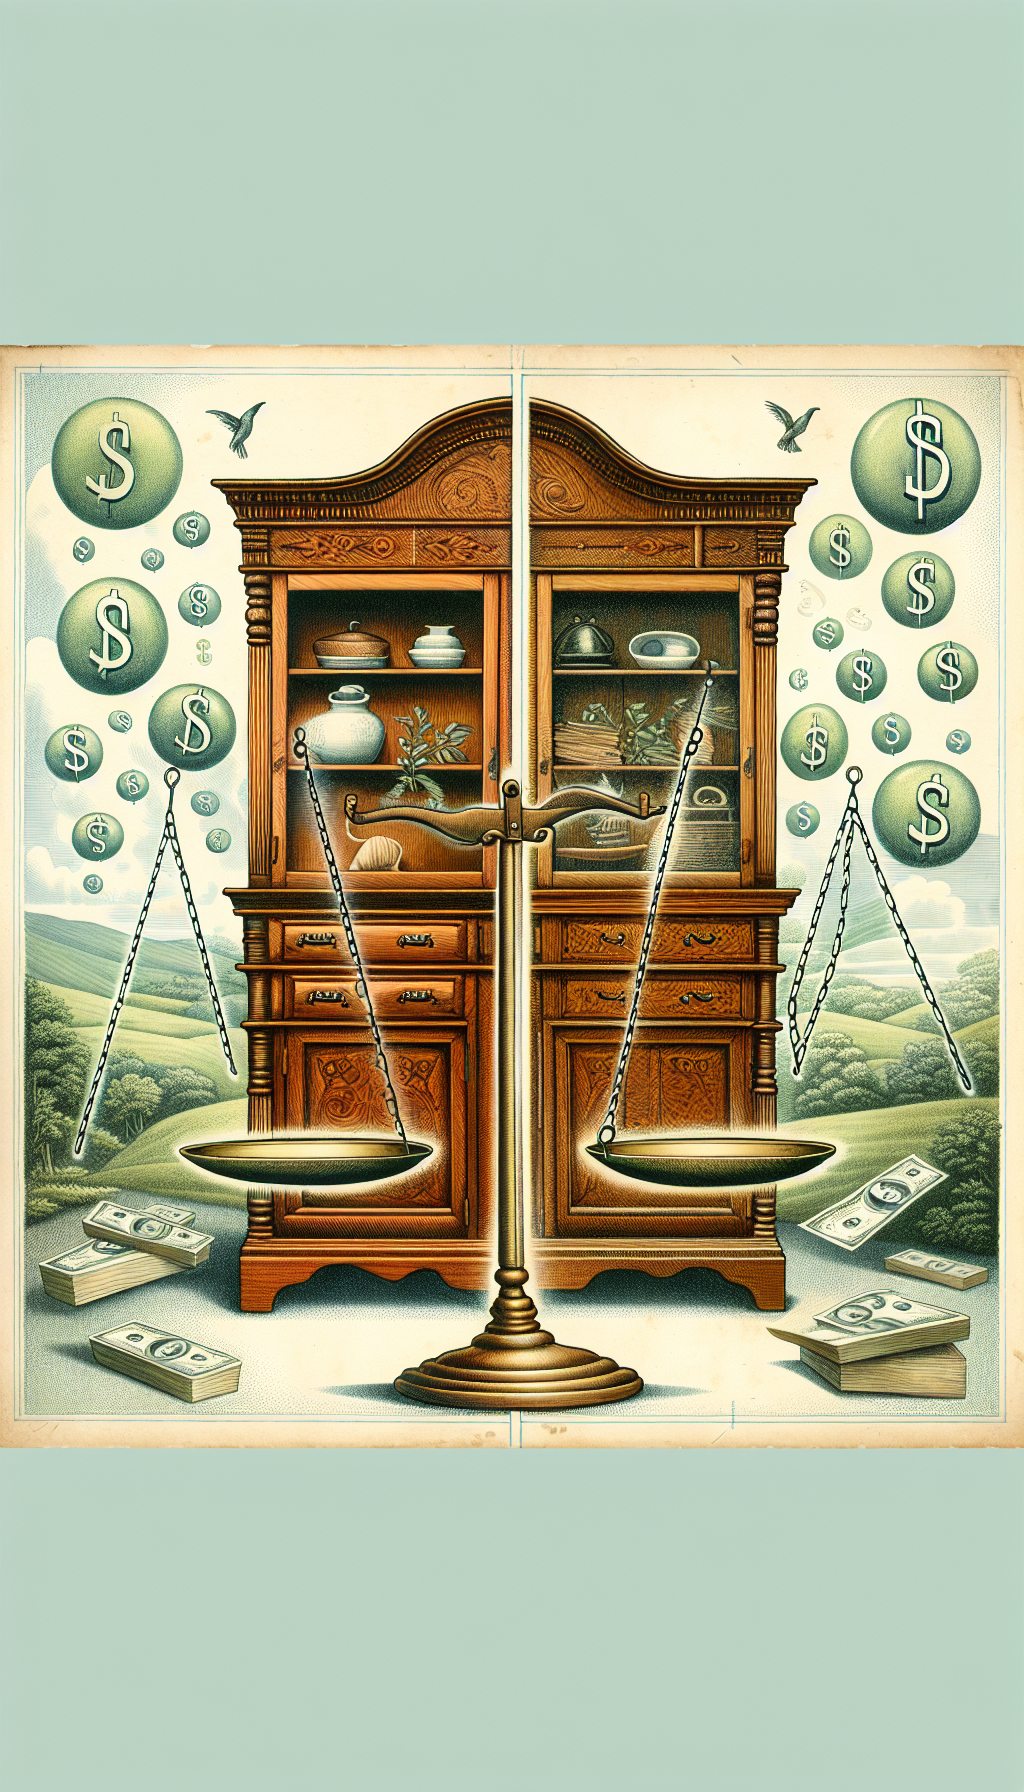 An illustration split in two: on the left, a pristine, untouched Hoosier cabinet showing signs of age and patina; on the right, the same cabinet, meticulously restored to its former glory. Dollar signs and question marks hover above, while a balance scale in the middle weighs 'original condition' against 'restoration', symbolizing the debate over the cabinet's value.